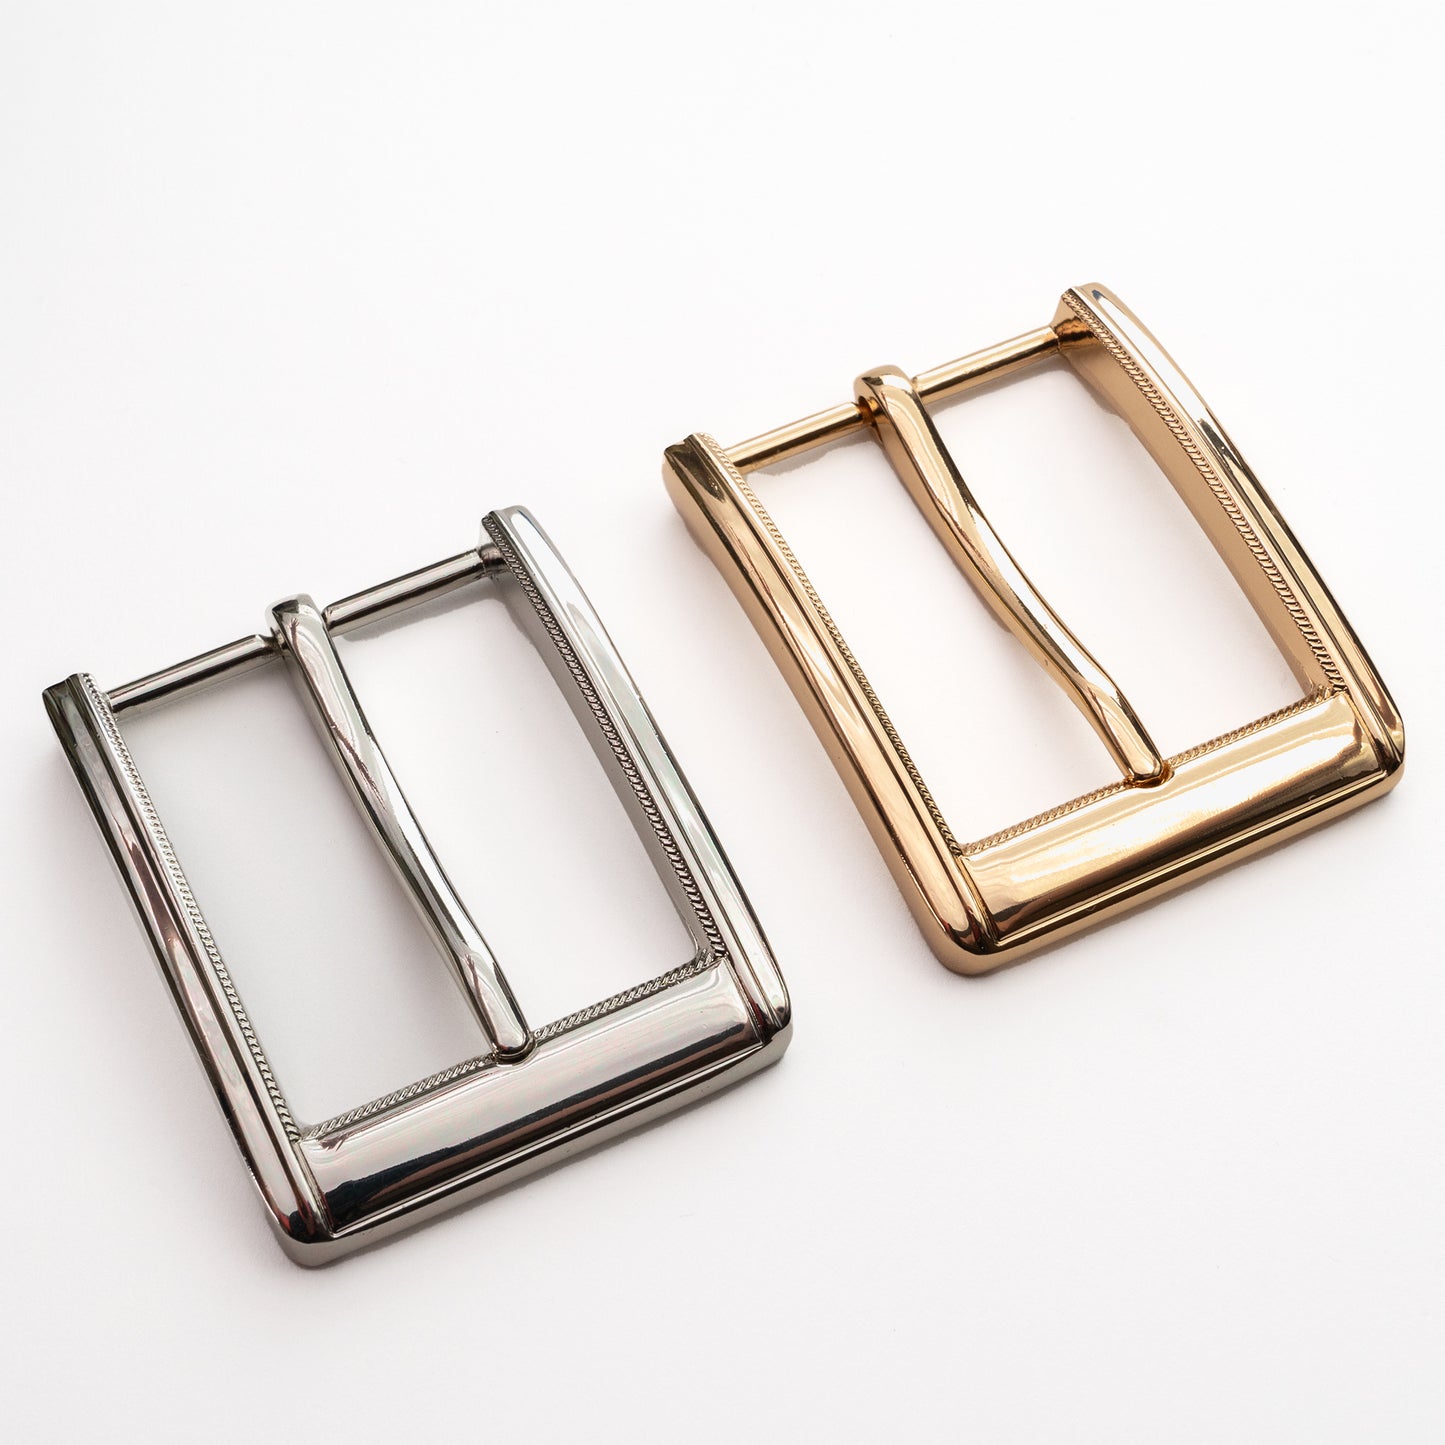 sherrill bros gold and silver buckles